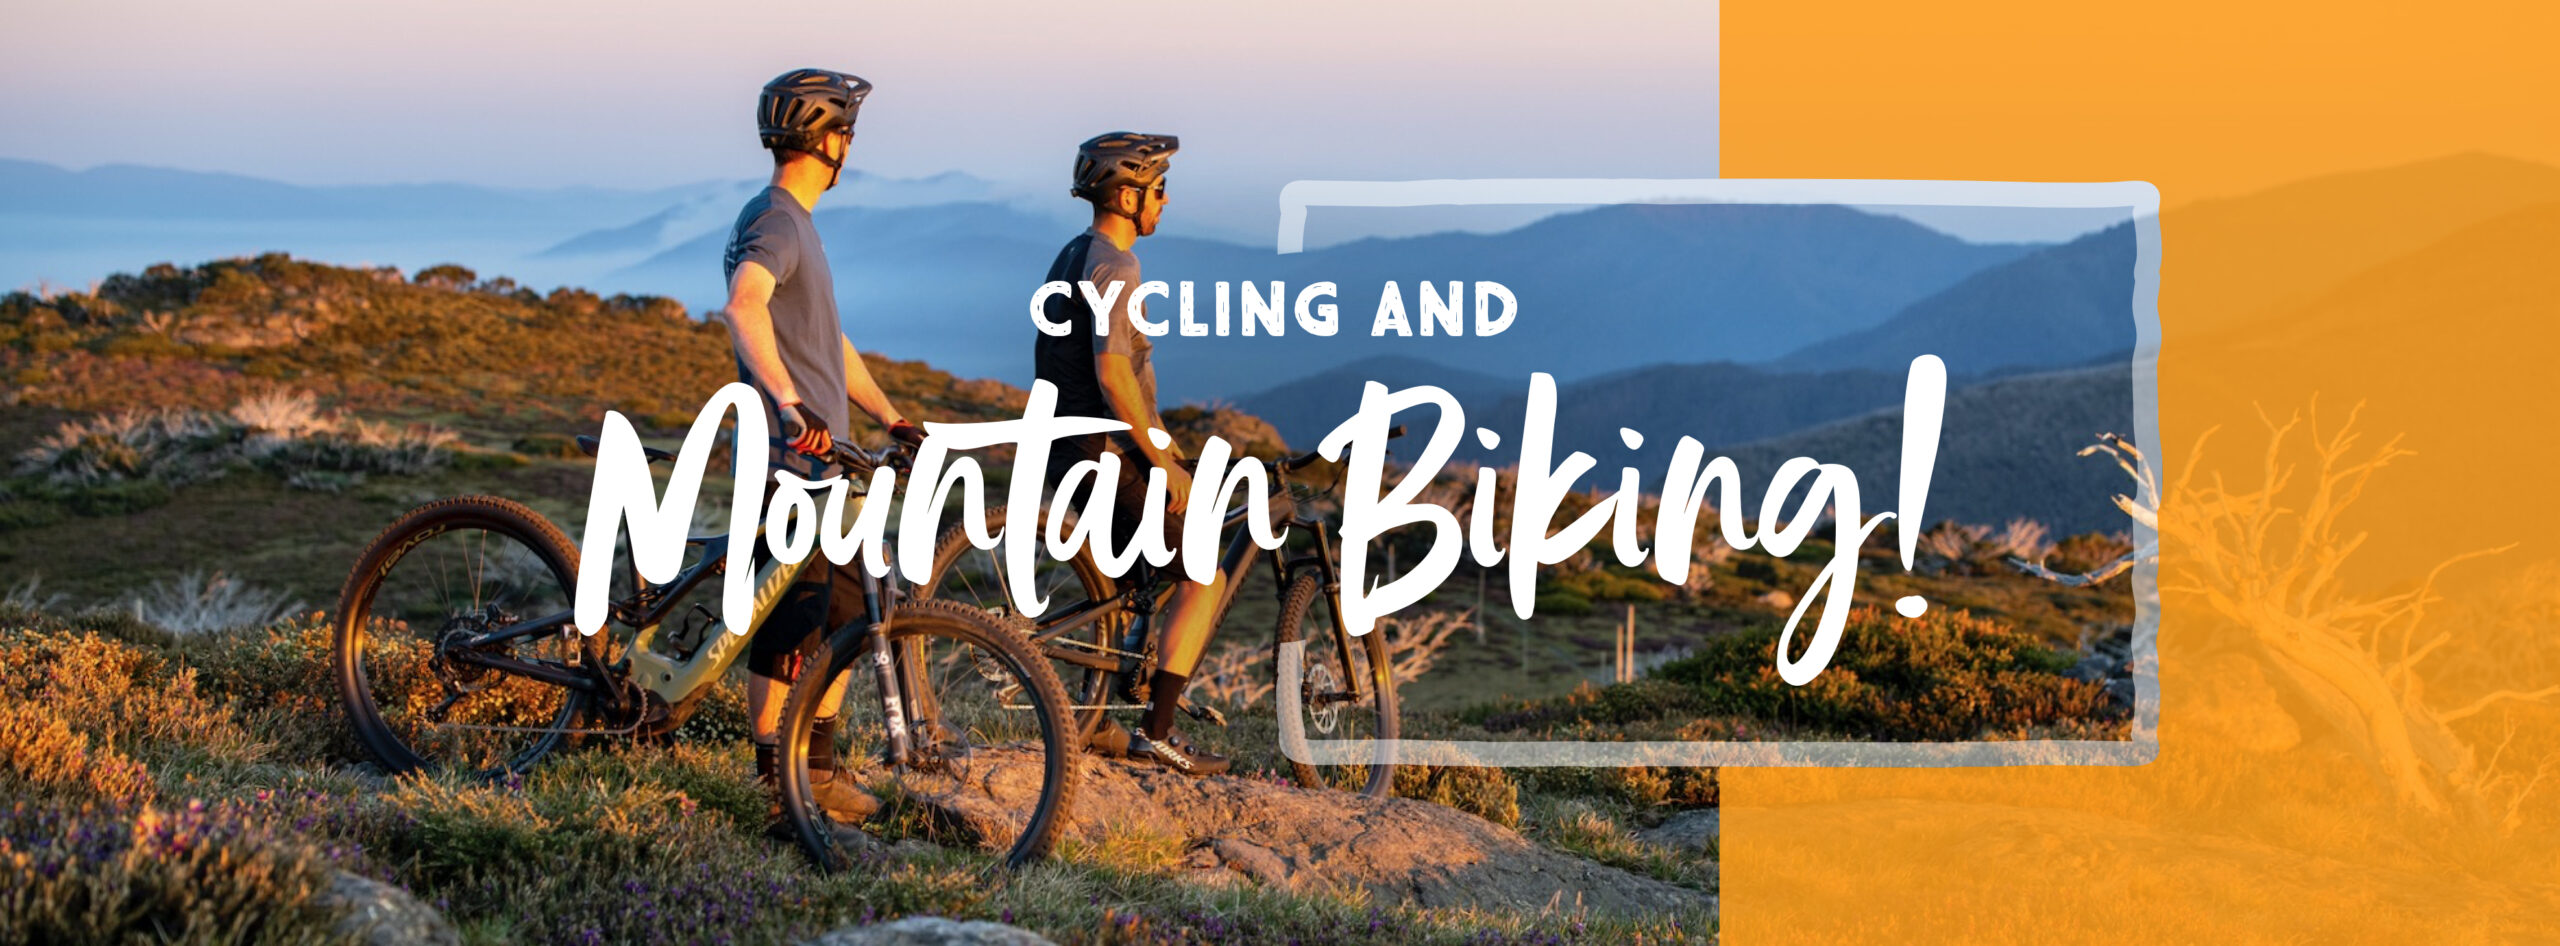 Cycling and Mountain Bikes Bright